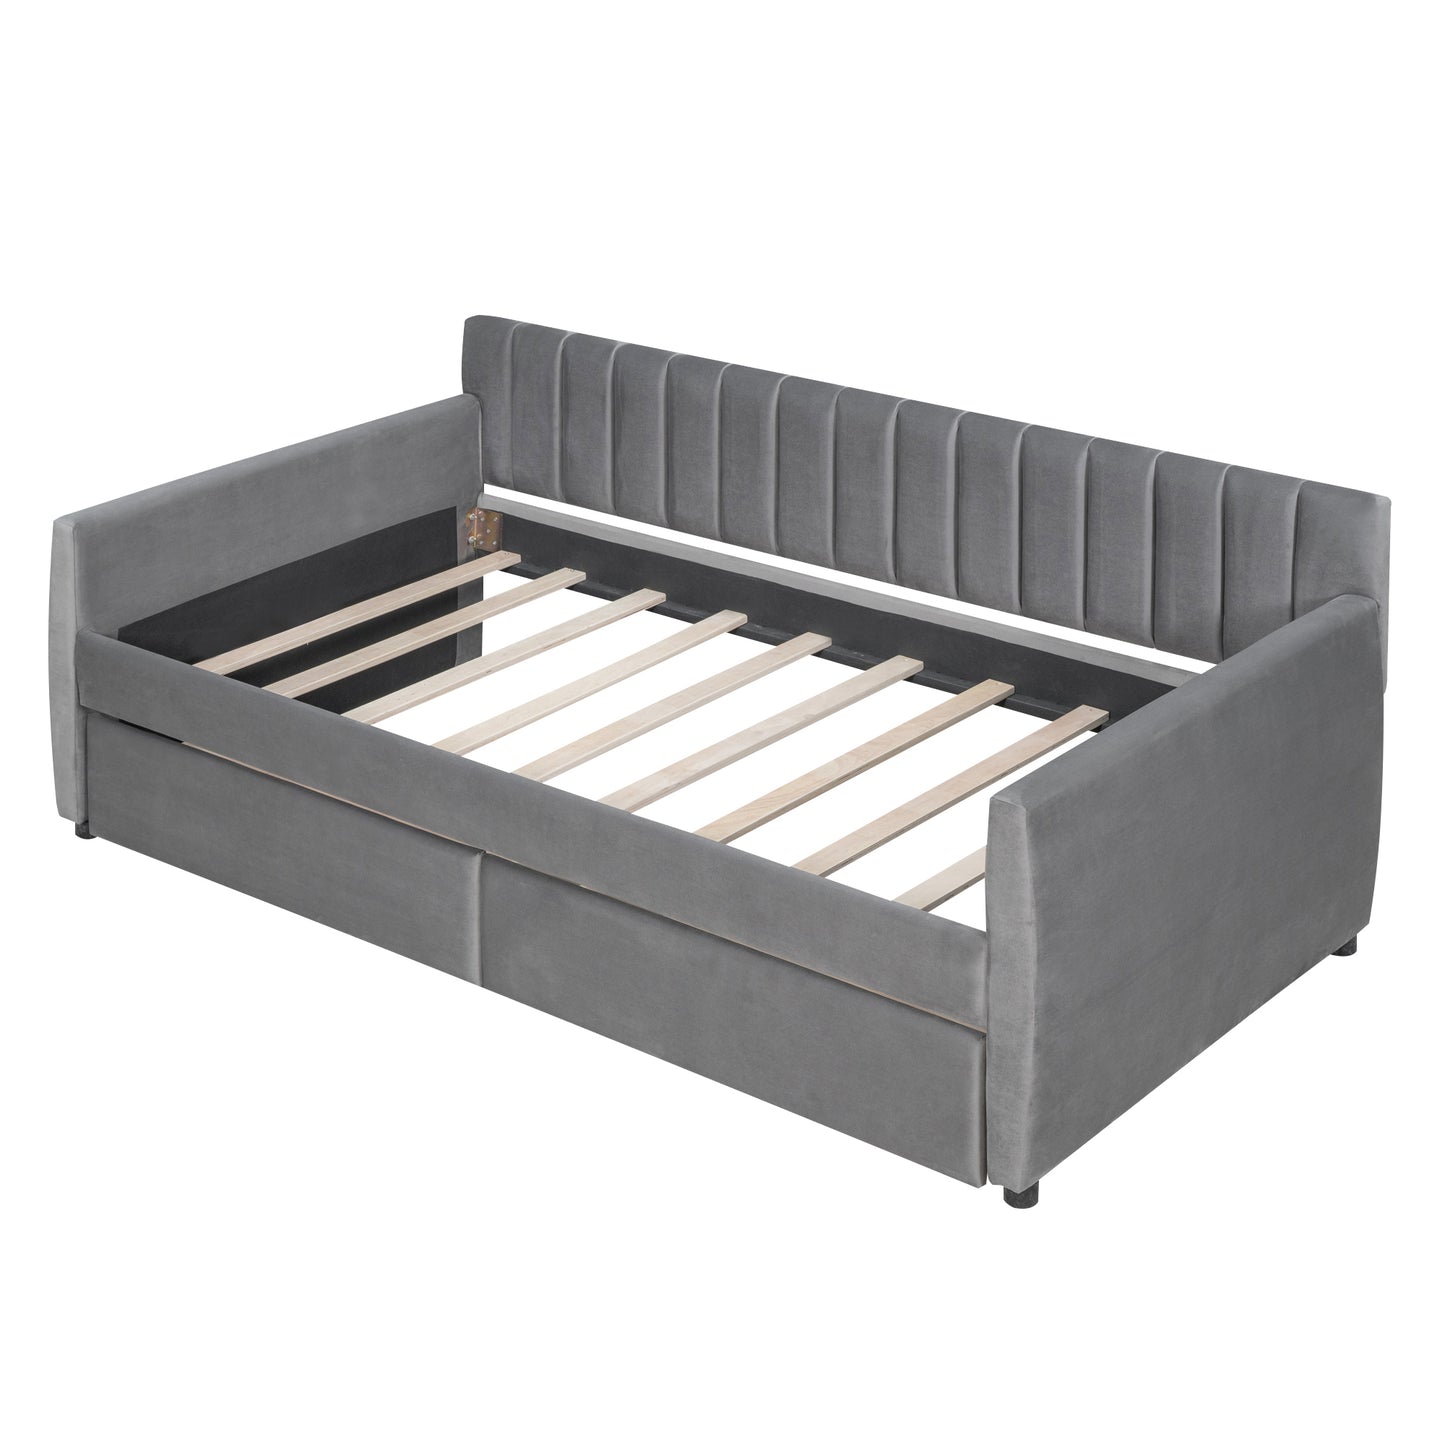 Vertical Lined Gray Daybed with Drawers (twin)